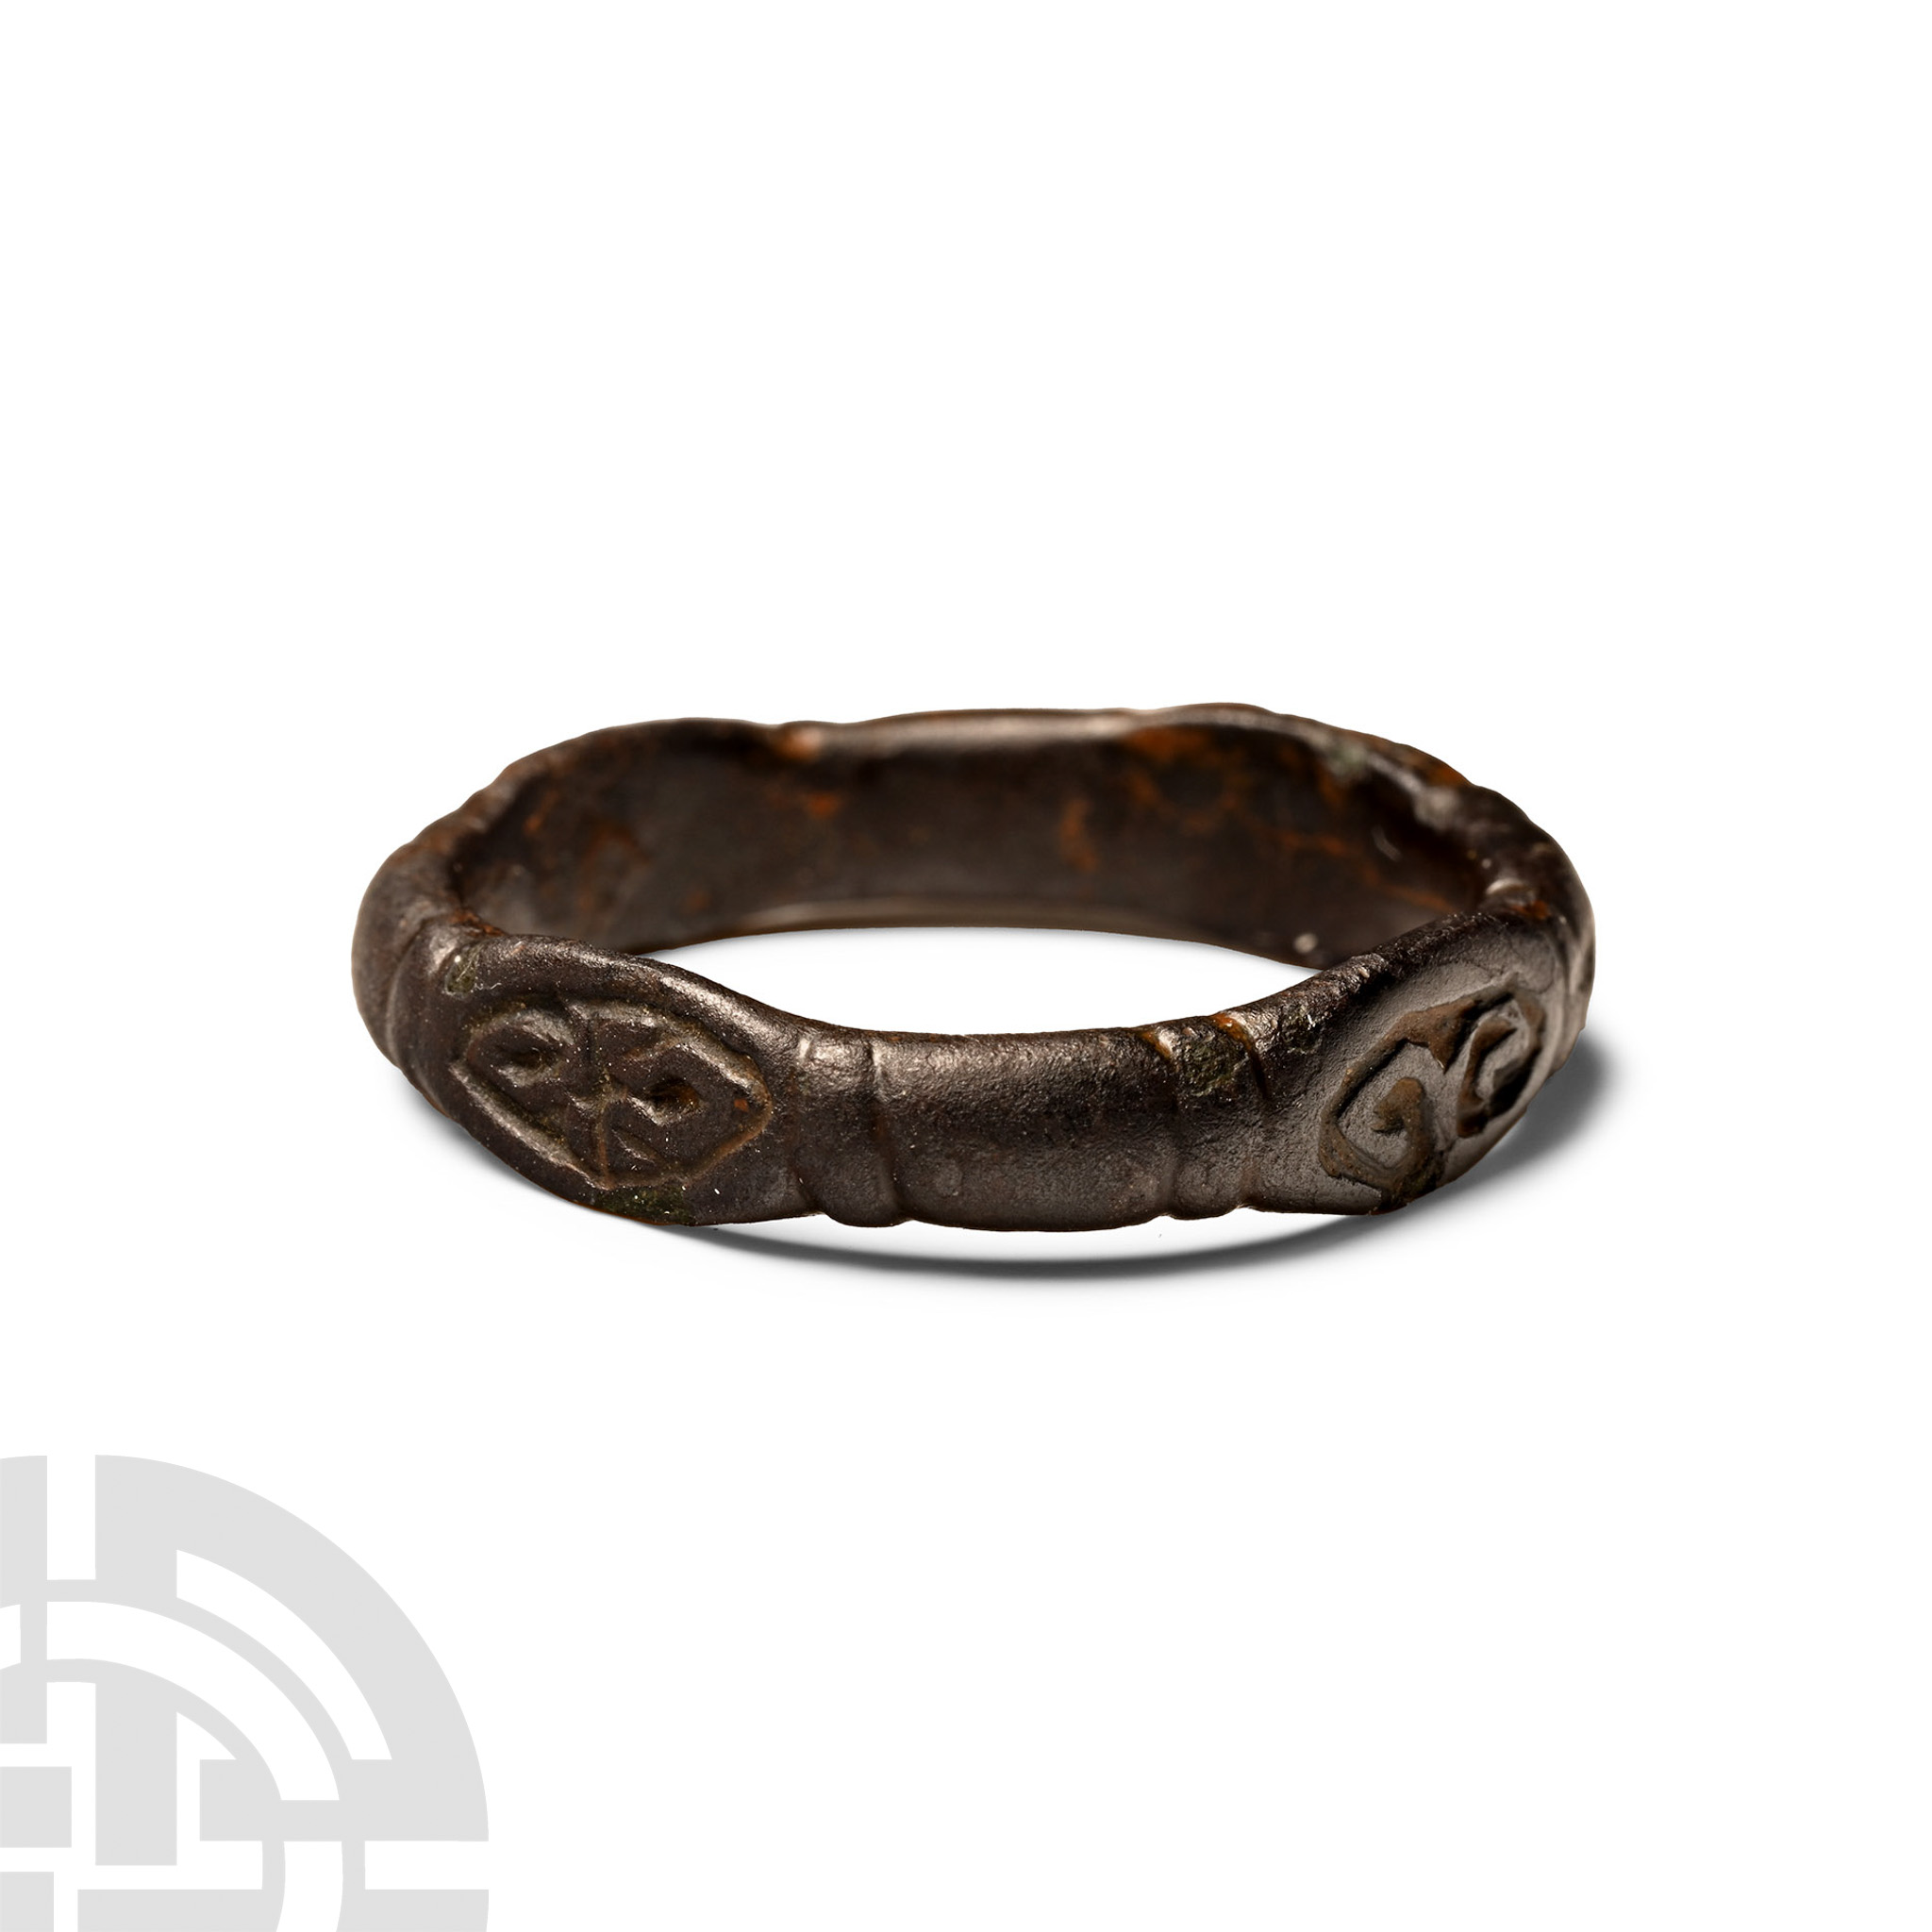 Late Anglo-Saxon Bronze Ring with Four Ovate Bezels